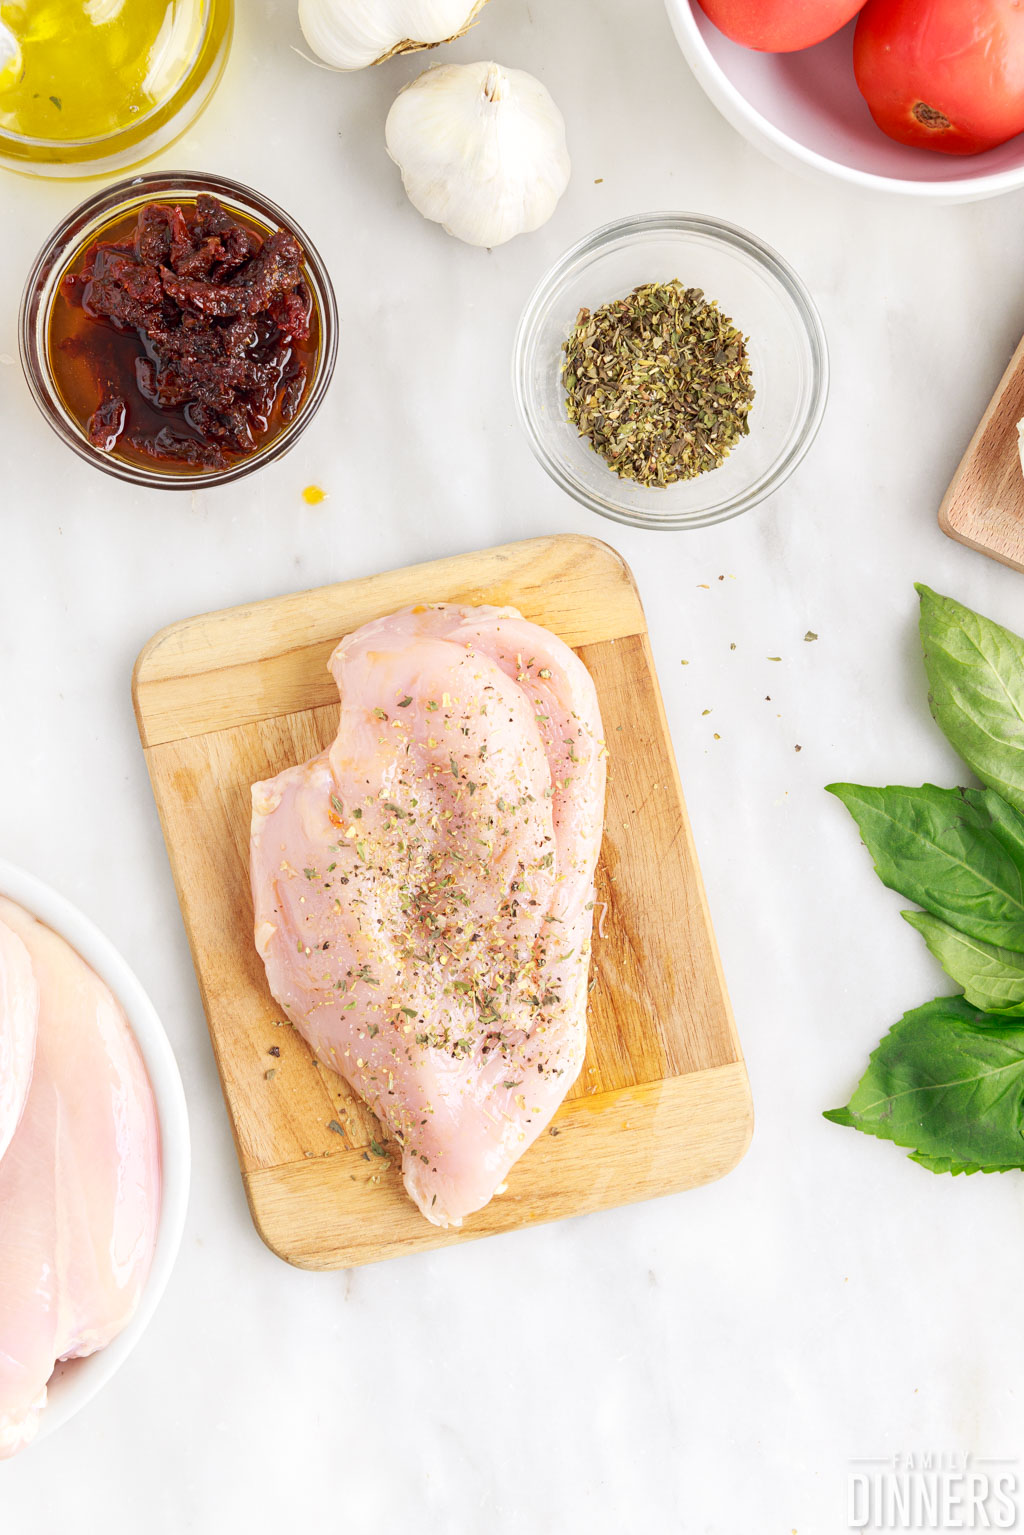 Oil and spices rubbed onto chicken breast.